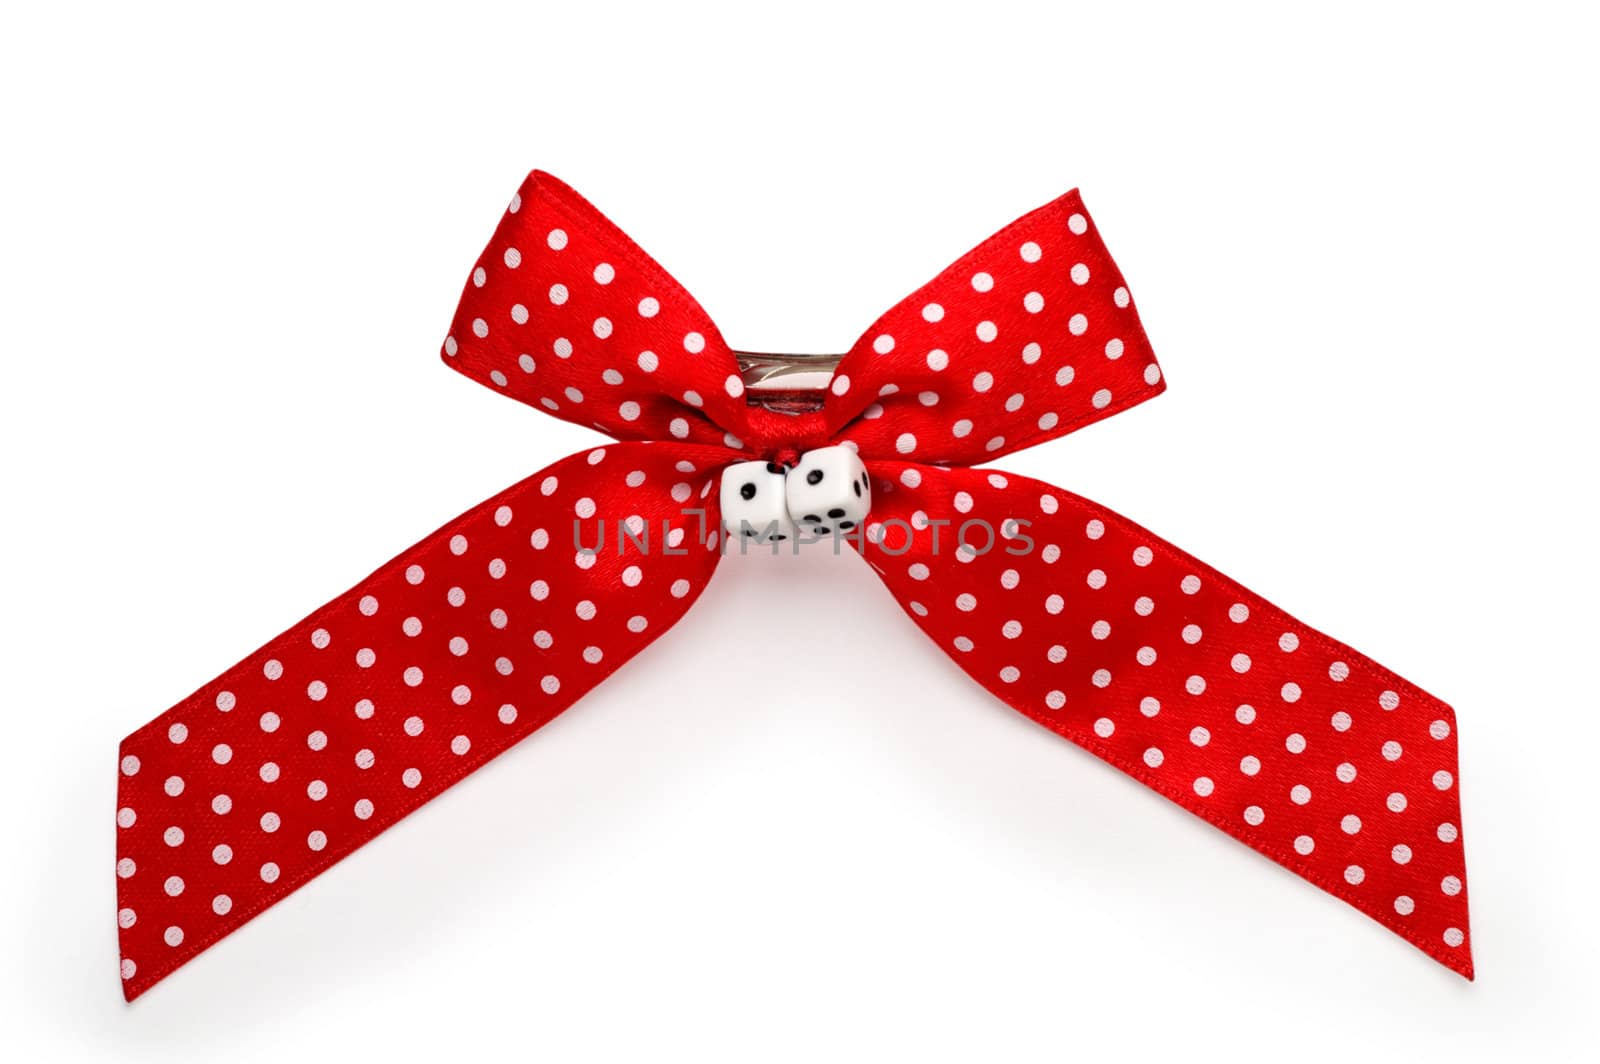 Bow tie 1 with clipping path